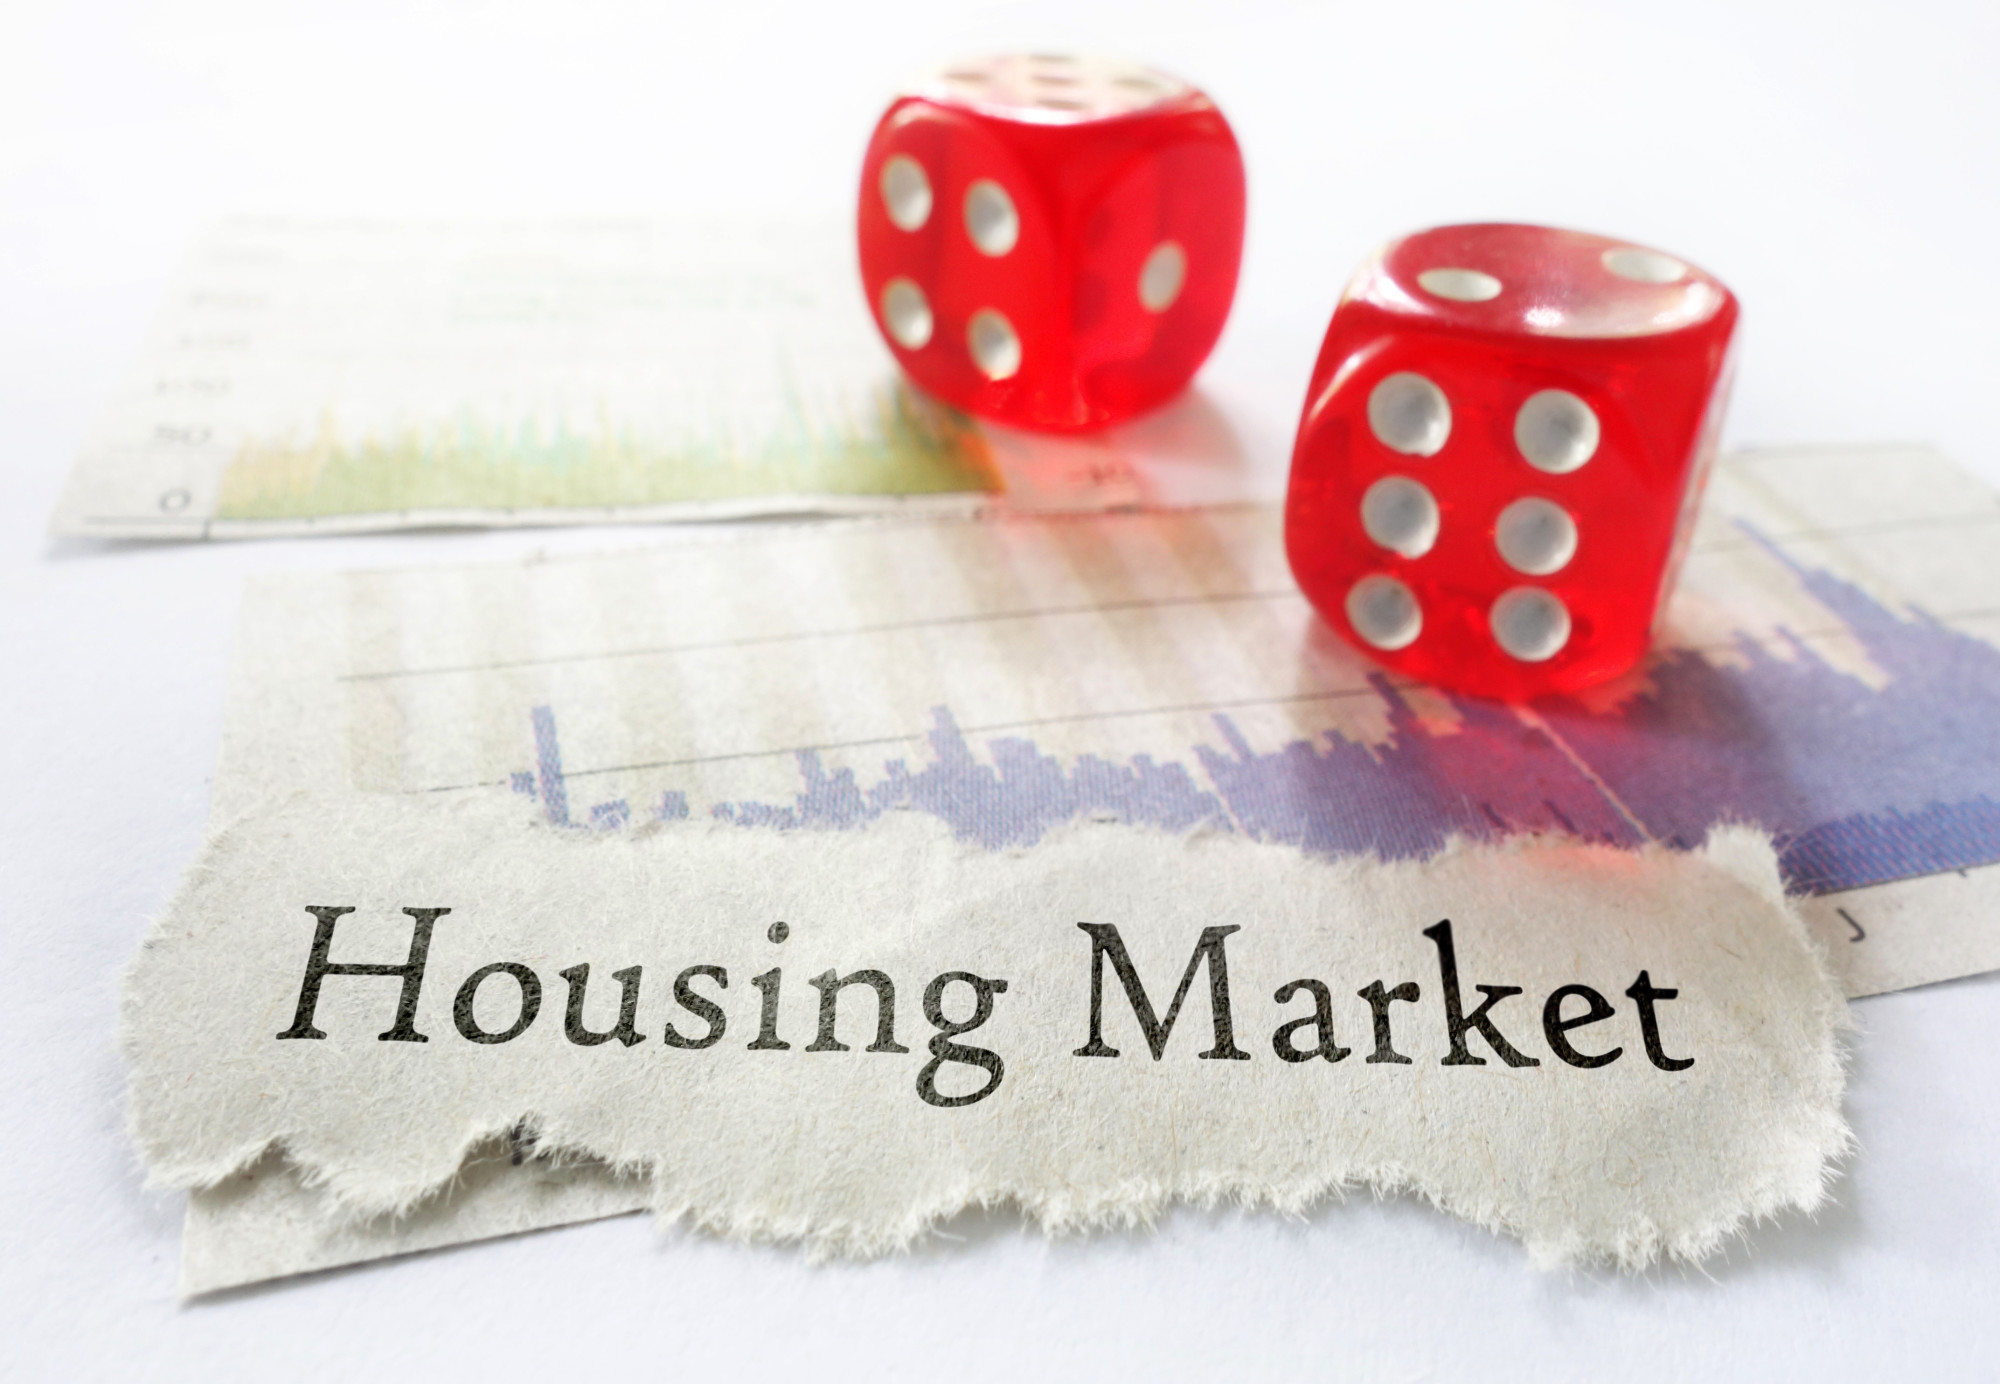 Today's housing market is quite the wild one, but you can do several things to find success as a buyer. Check out this guide for some advice.